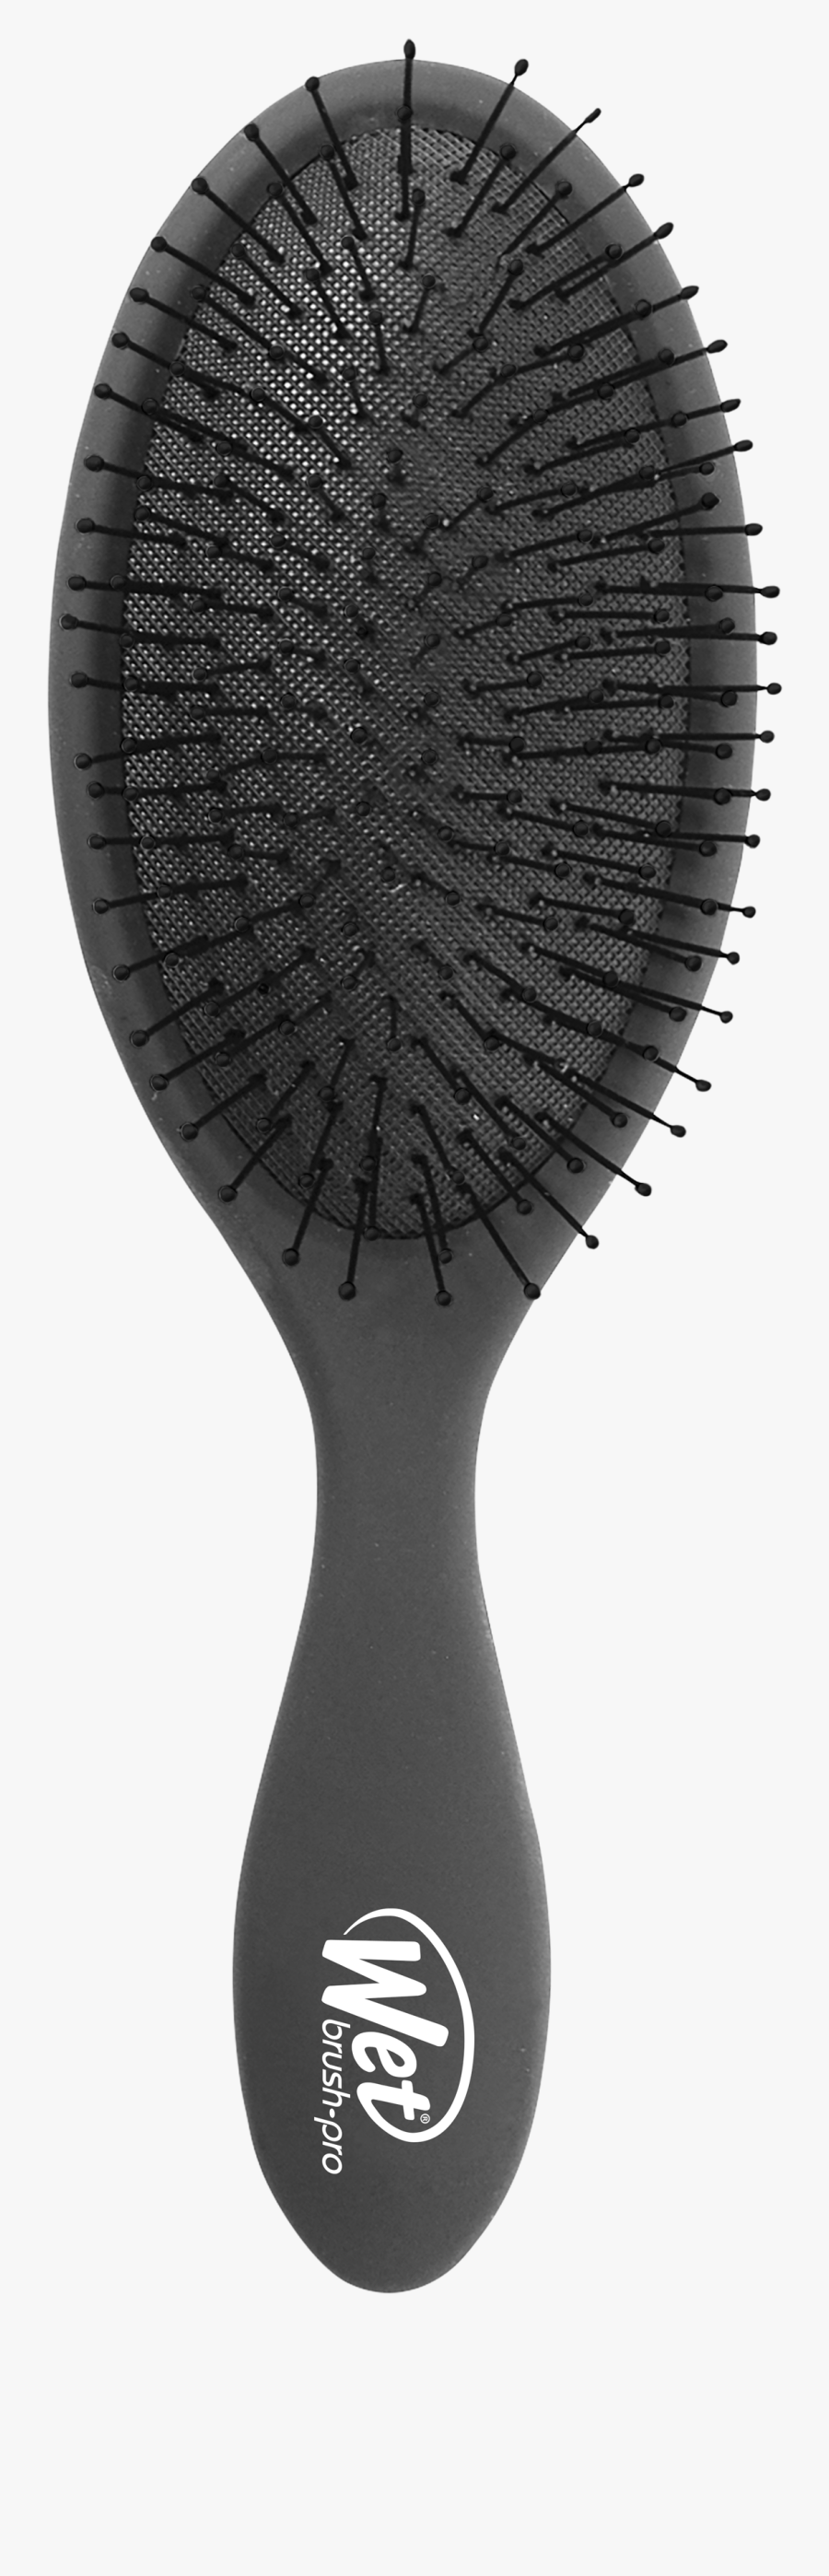 Hairbrush Png - Wet And Dry Hair Brushes, Transparent Clipart